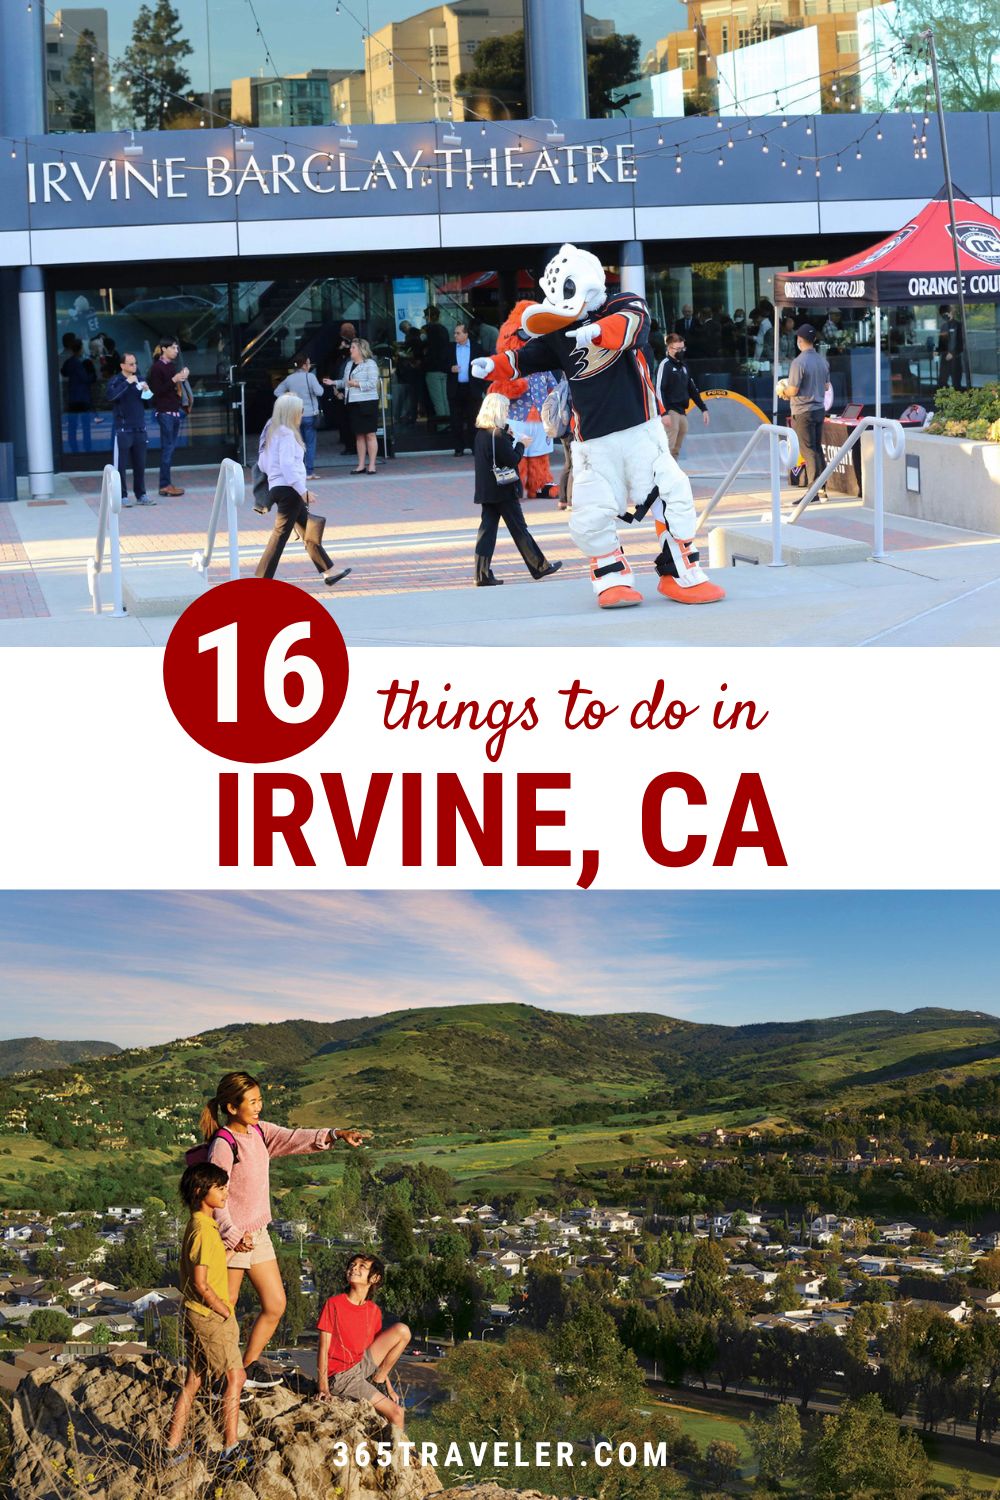 16 INCREDIBLE THINGS TO DO IN IRVINE, CALIFORNIA